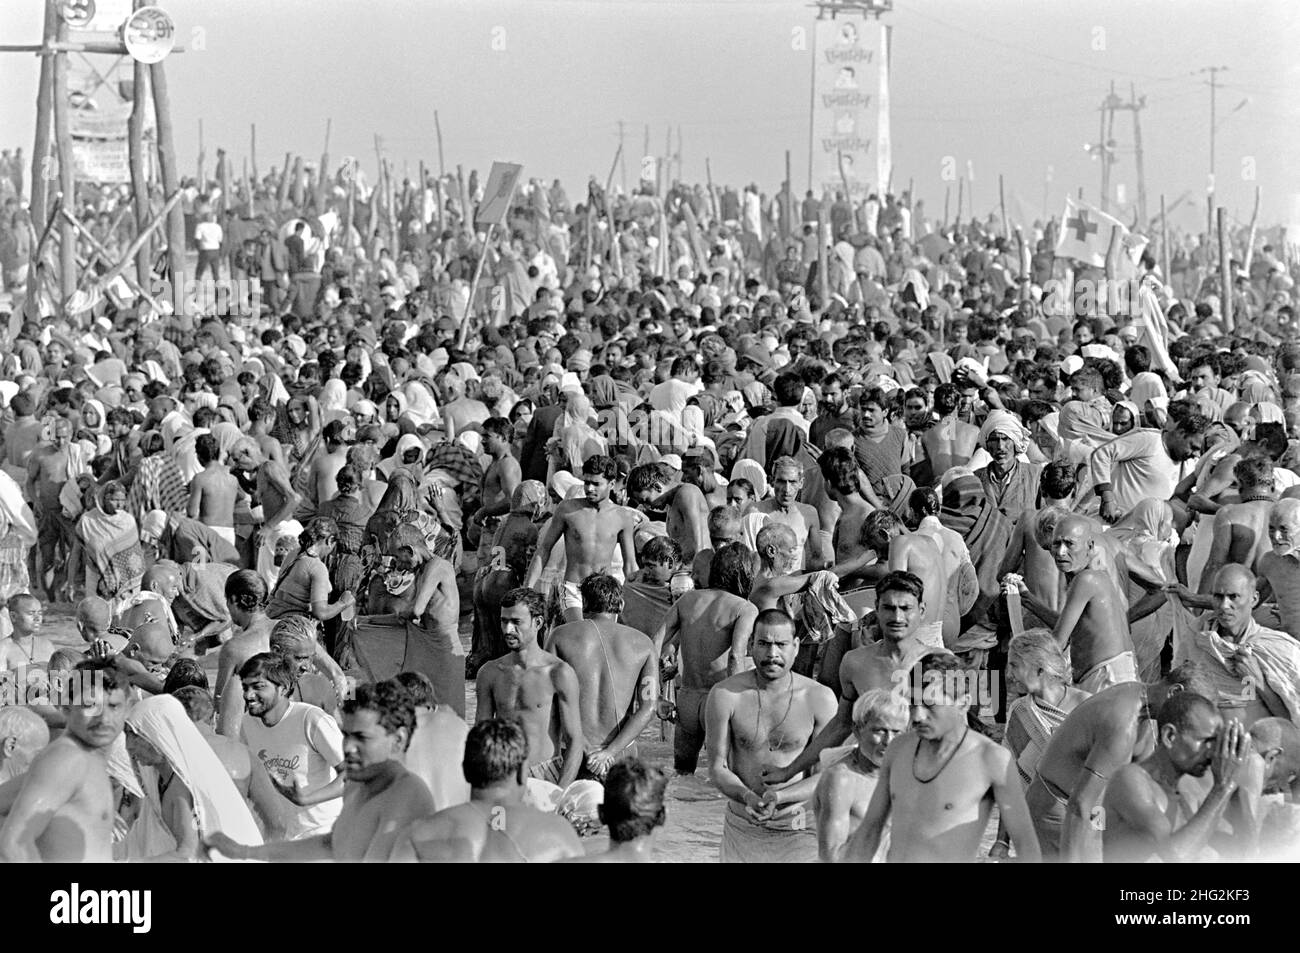 Indian pilgrims perform ritual bathing in the confluence of the Ganges and Yamuna Rivers at the climax of the Kumbh Mela festival February 6, 1989 in Allahabad, India. The six-week festival is held every 12th year and attracts millions of Hindu pilgrims. Stock Photo